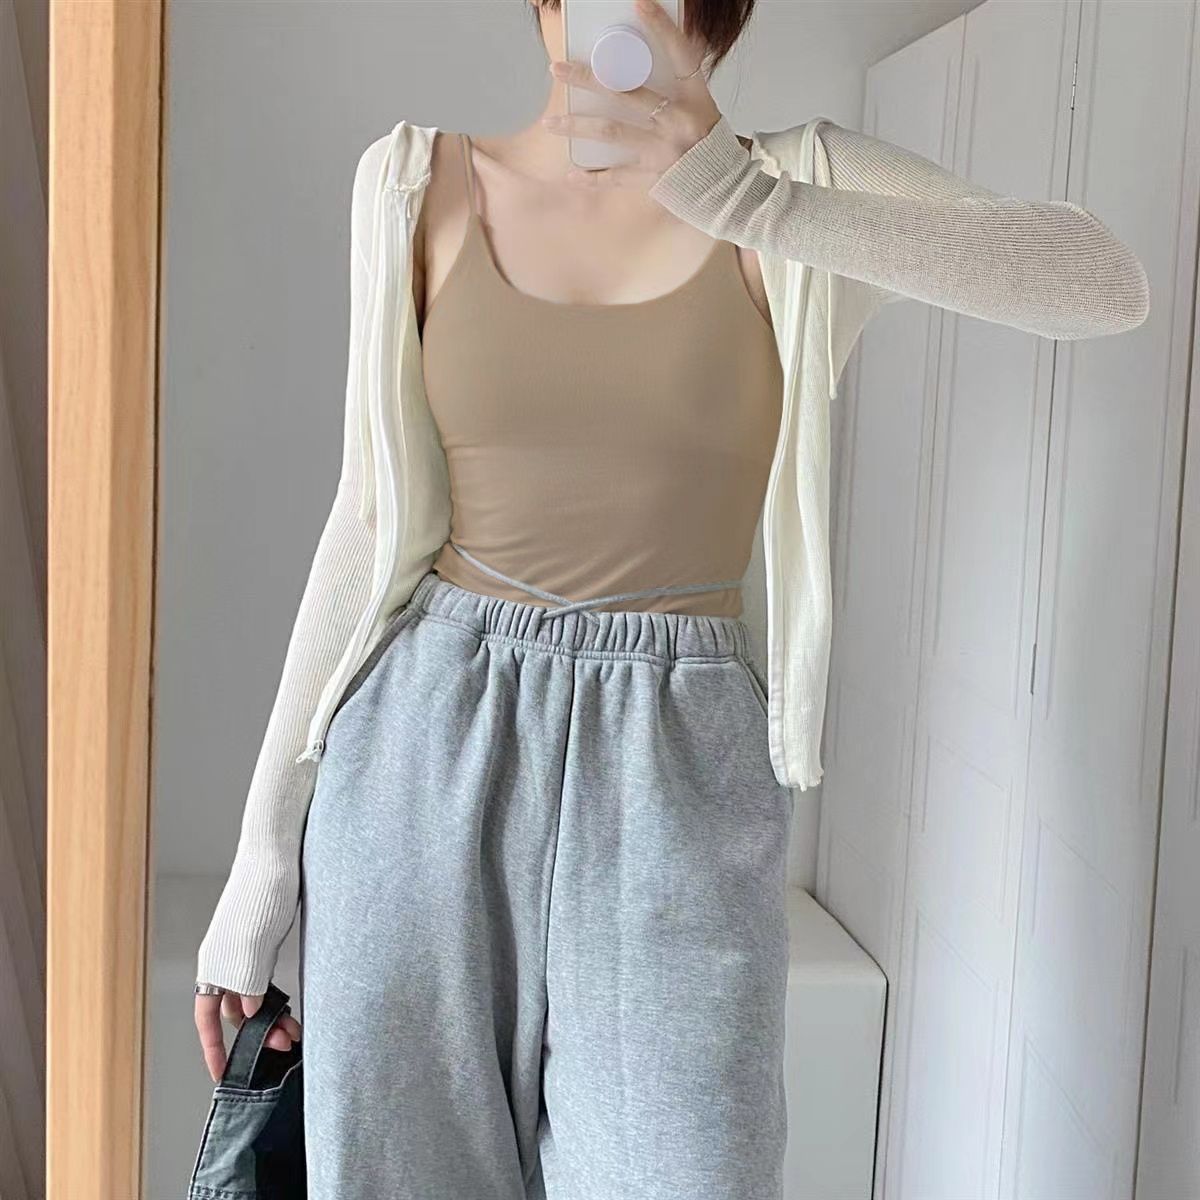 Hot girl camisole vest women's summer double-layer bottoming white thin shoulder straps self-cultivation and thin outerwear top tide